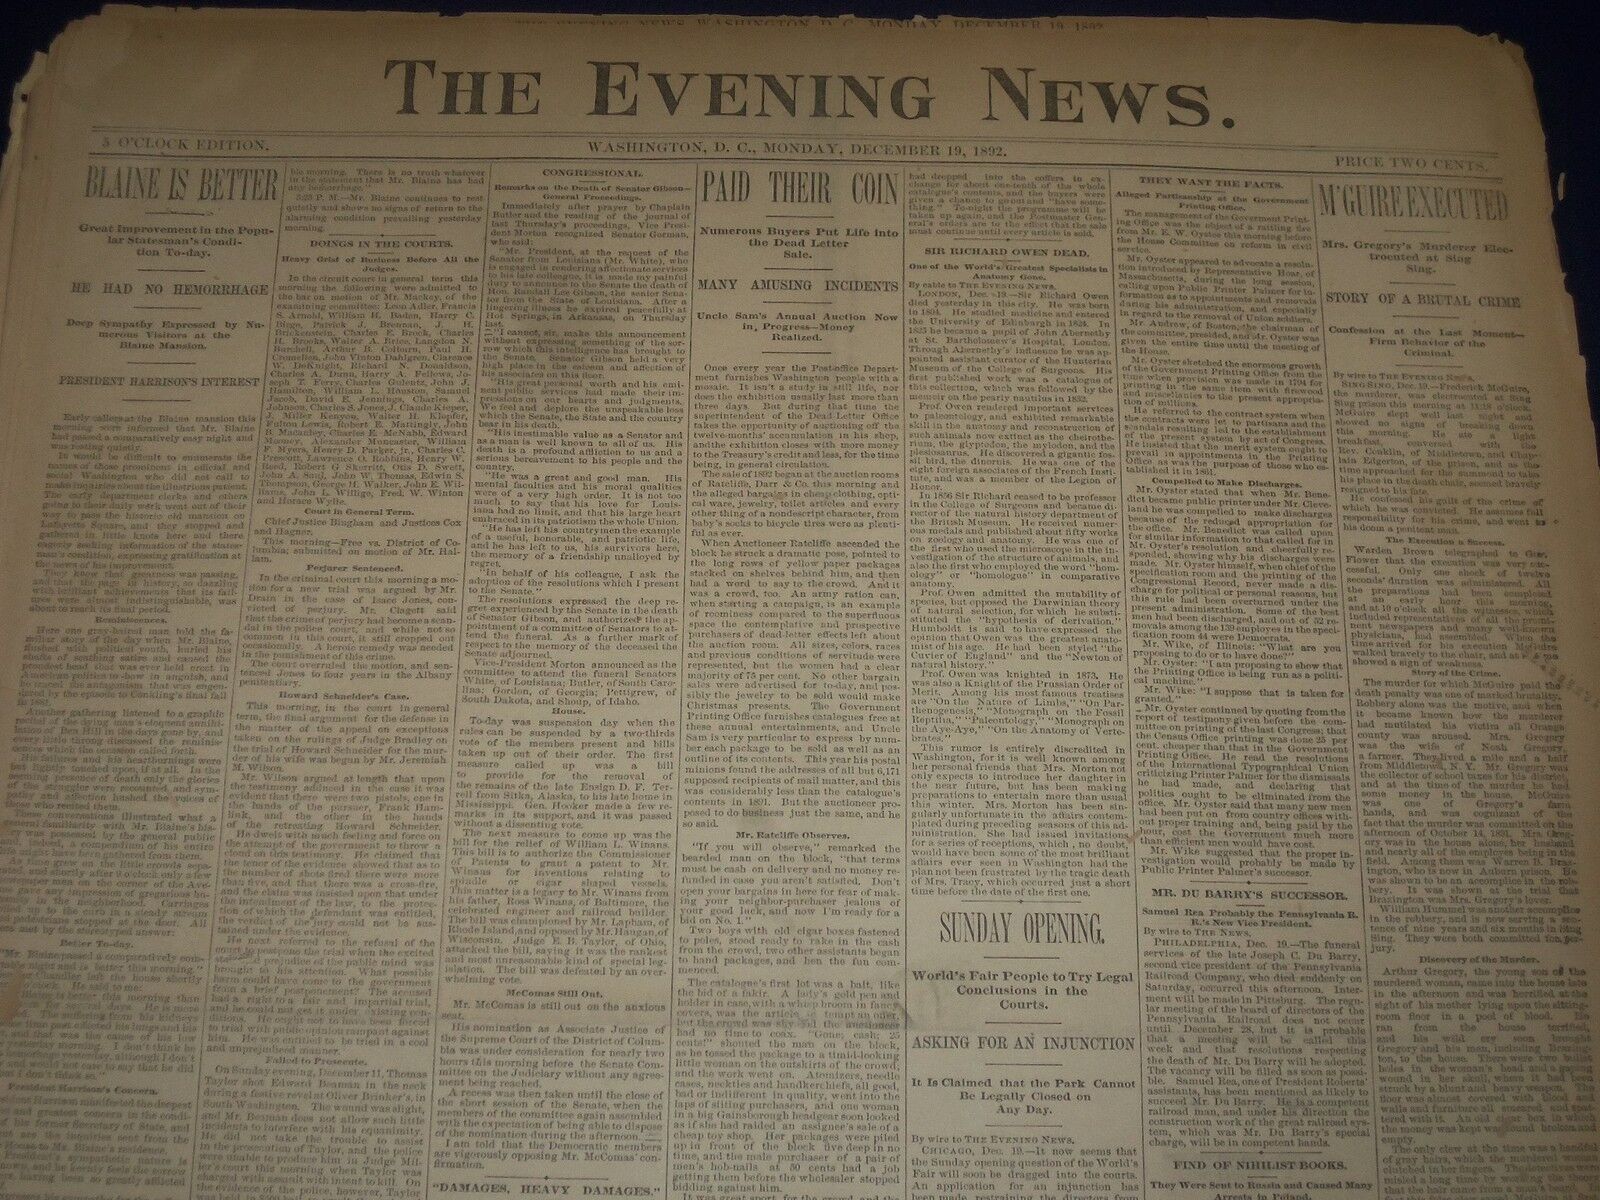 1892 THE EVENING NEWS NEWSPAPER LOT OF 11 ISSUES - WASHINGTON D. C. - UP 43